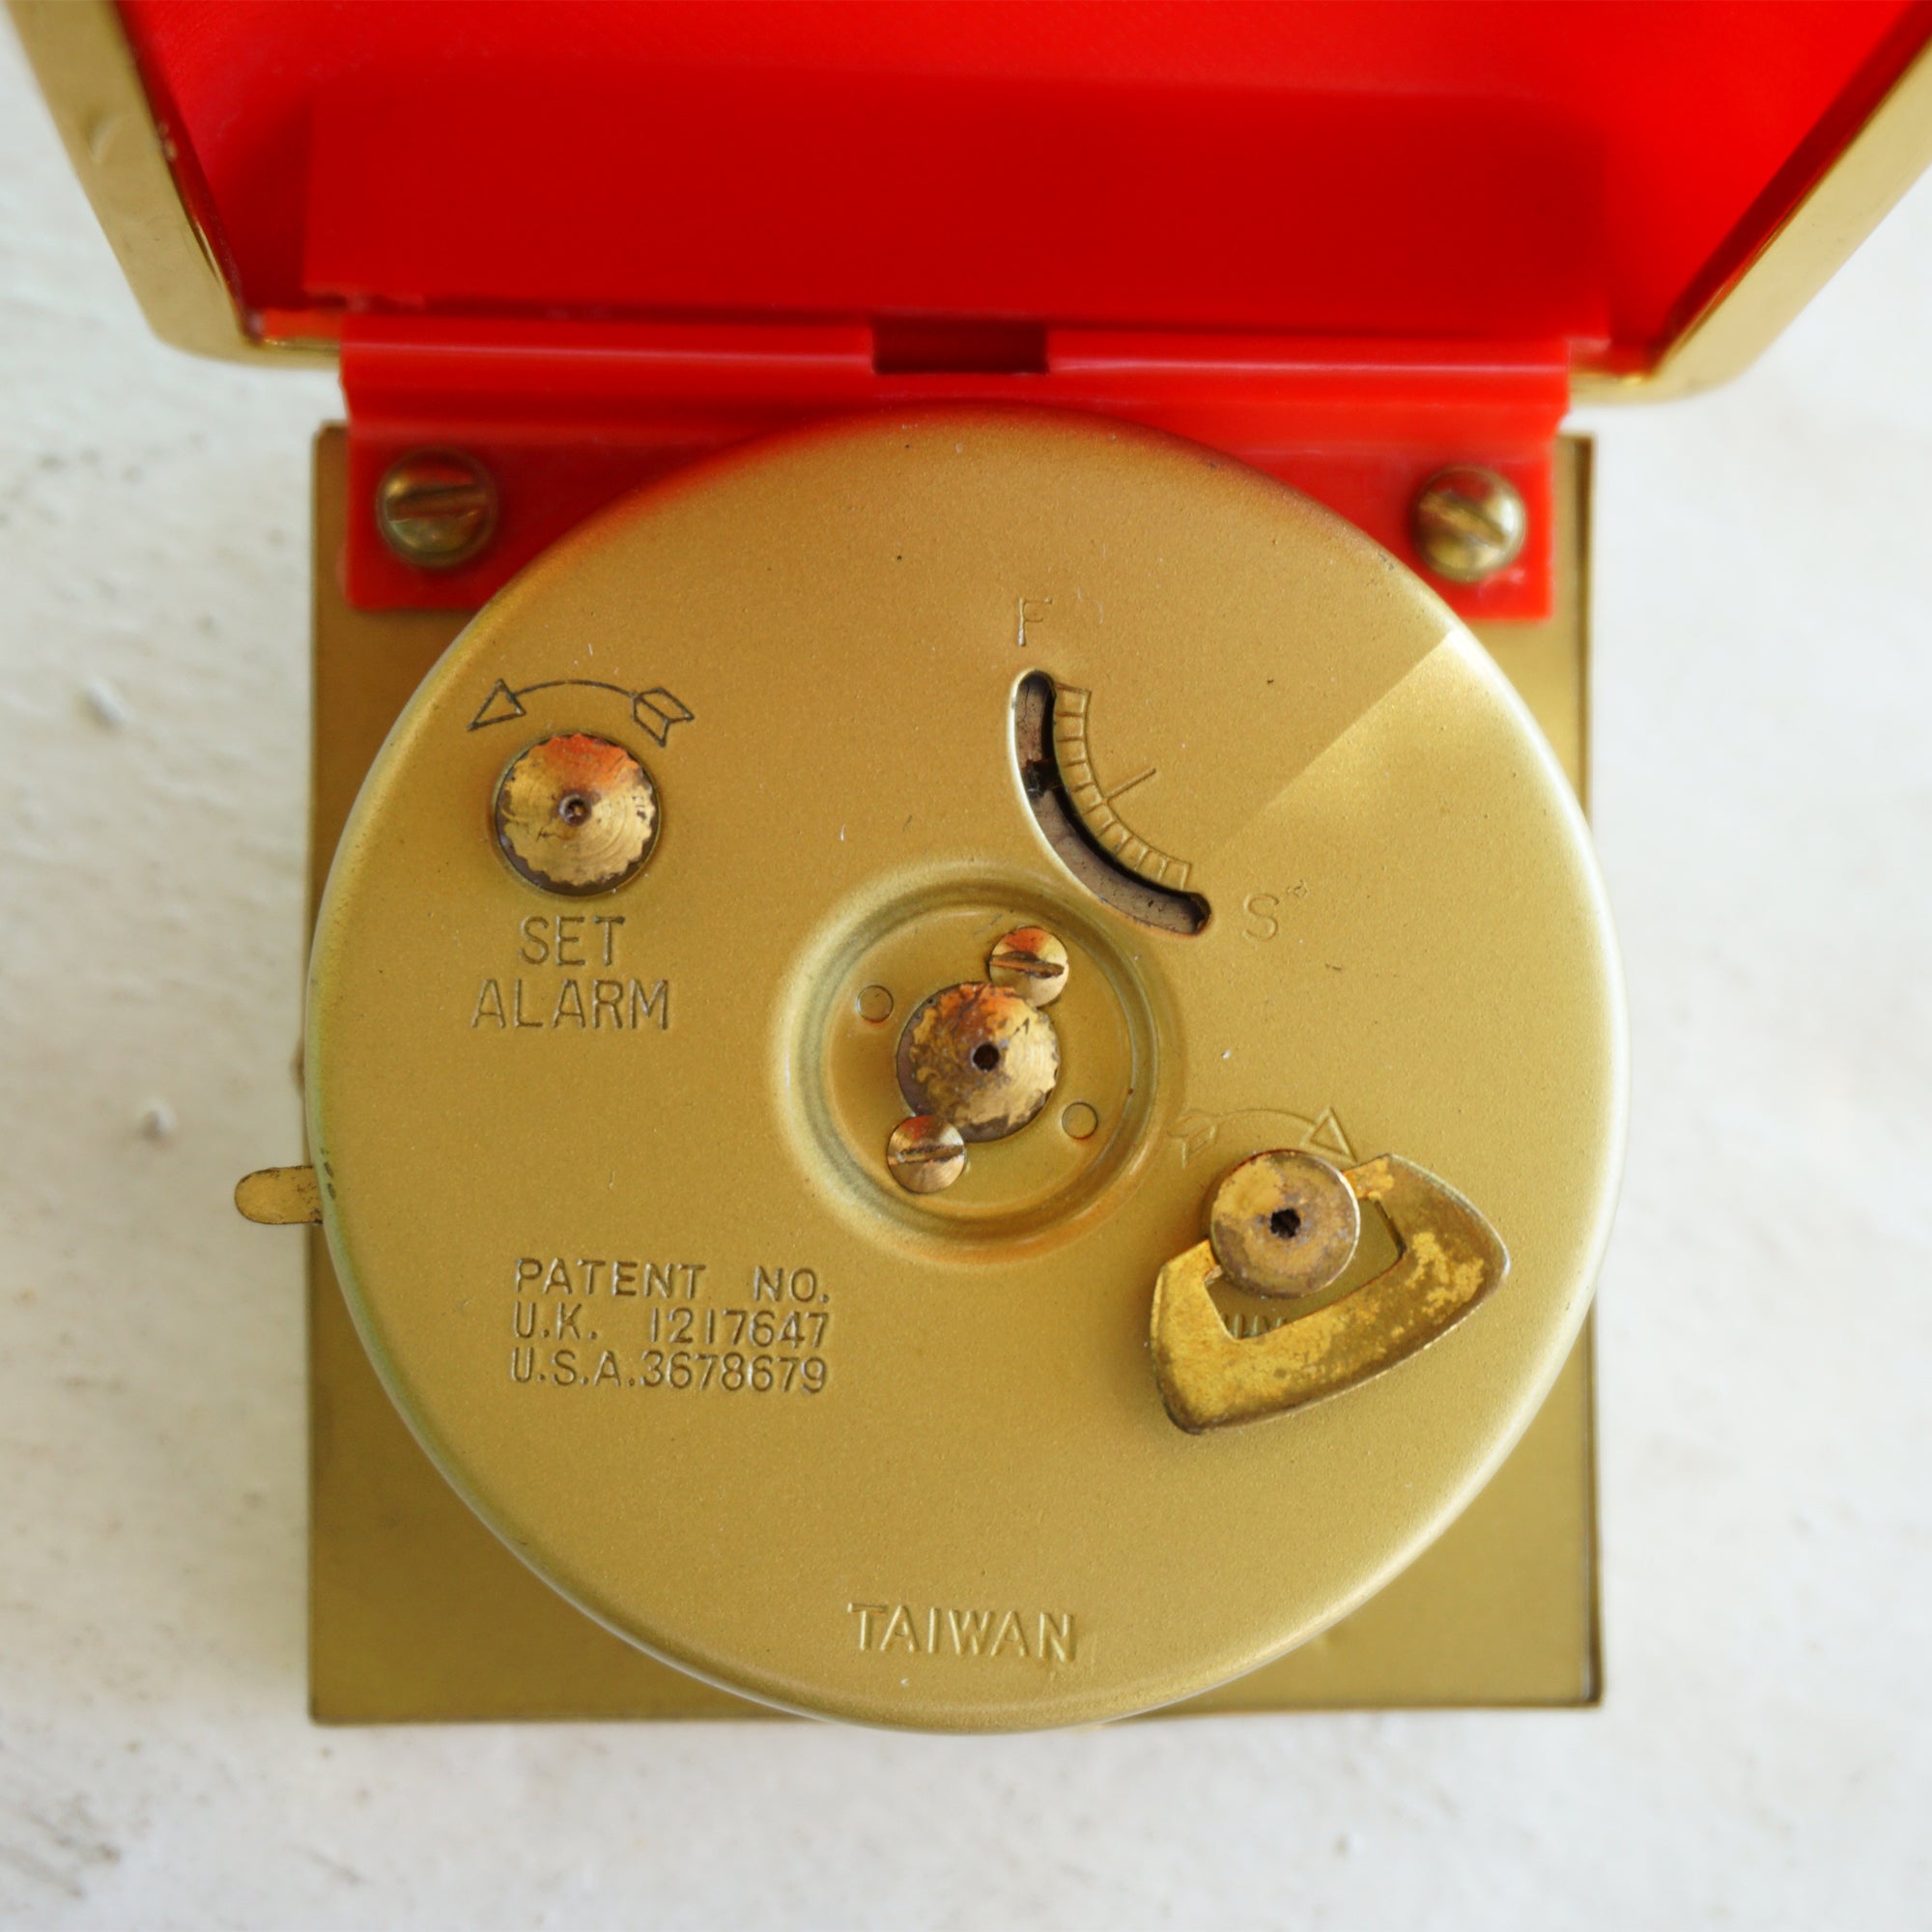 Vintage WESTCLOX Gold Tone Mechanical Travel Alarm Clock in Red Case. Made by General Time in Taiwan.